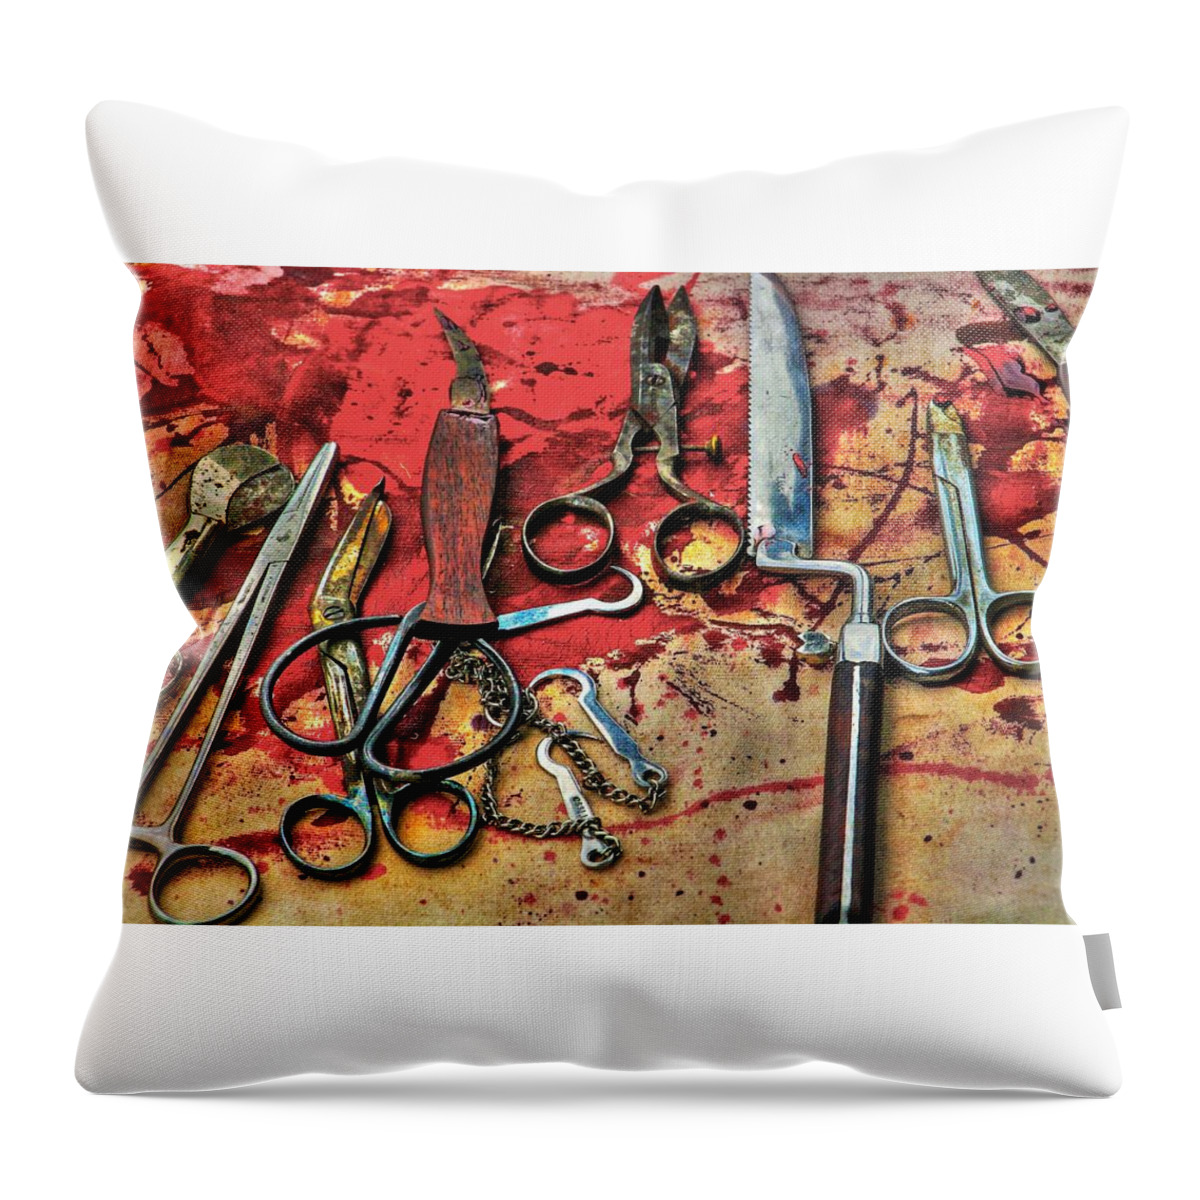 Antique Medical Instruments Throw Pillow featuring the photograph Tools Of The Trade by Karl Anderson